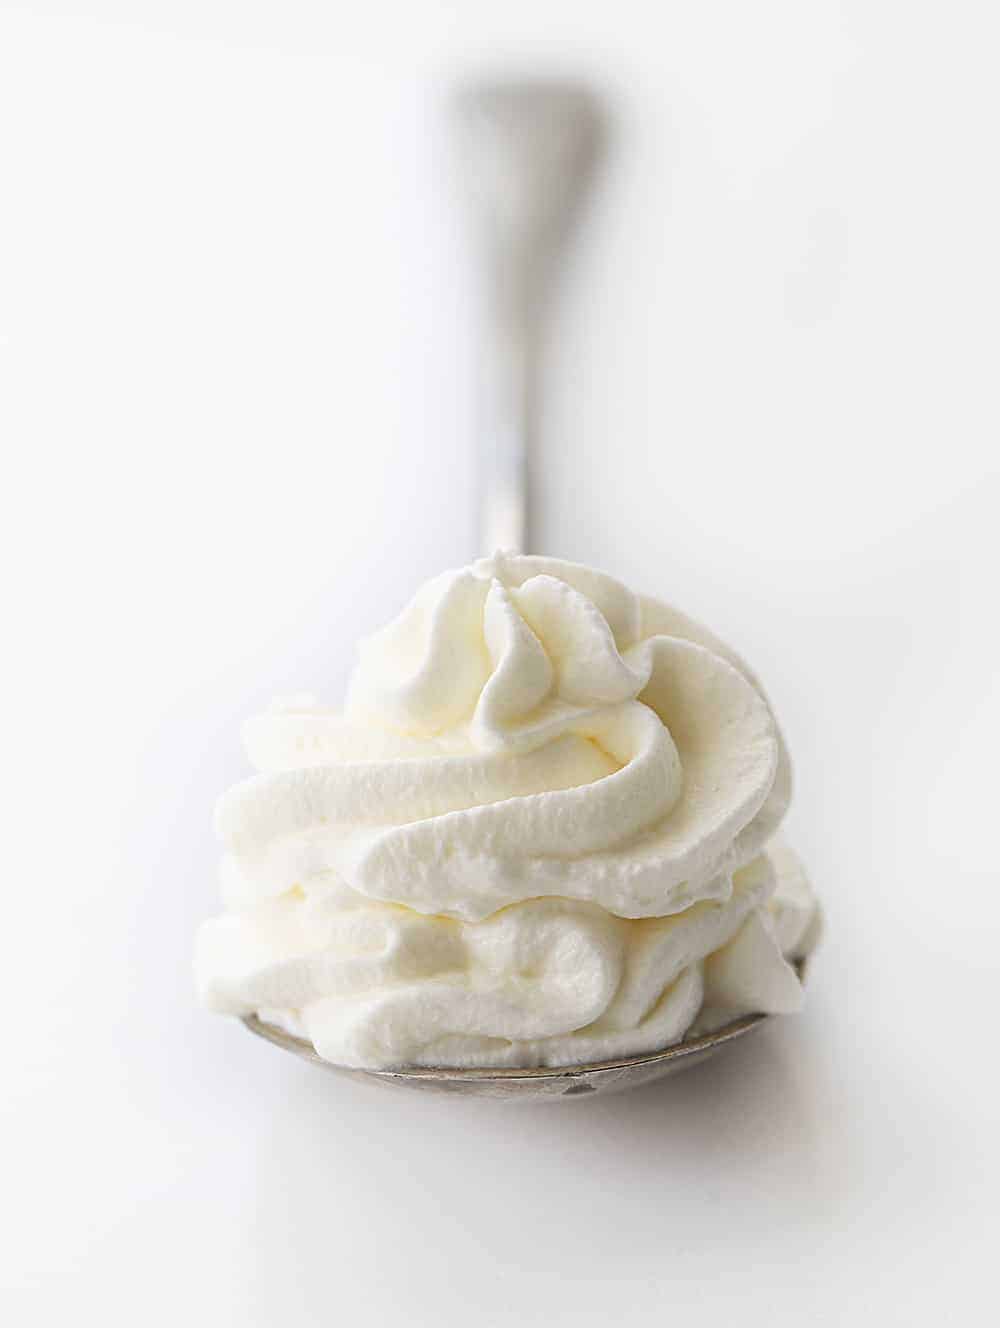 Spoon with Dollop of Homemade Whipped Cream Piped onto It